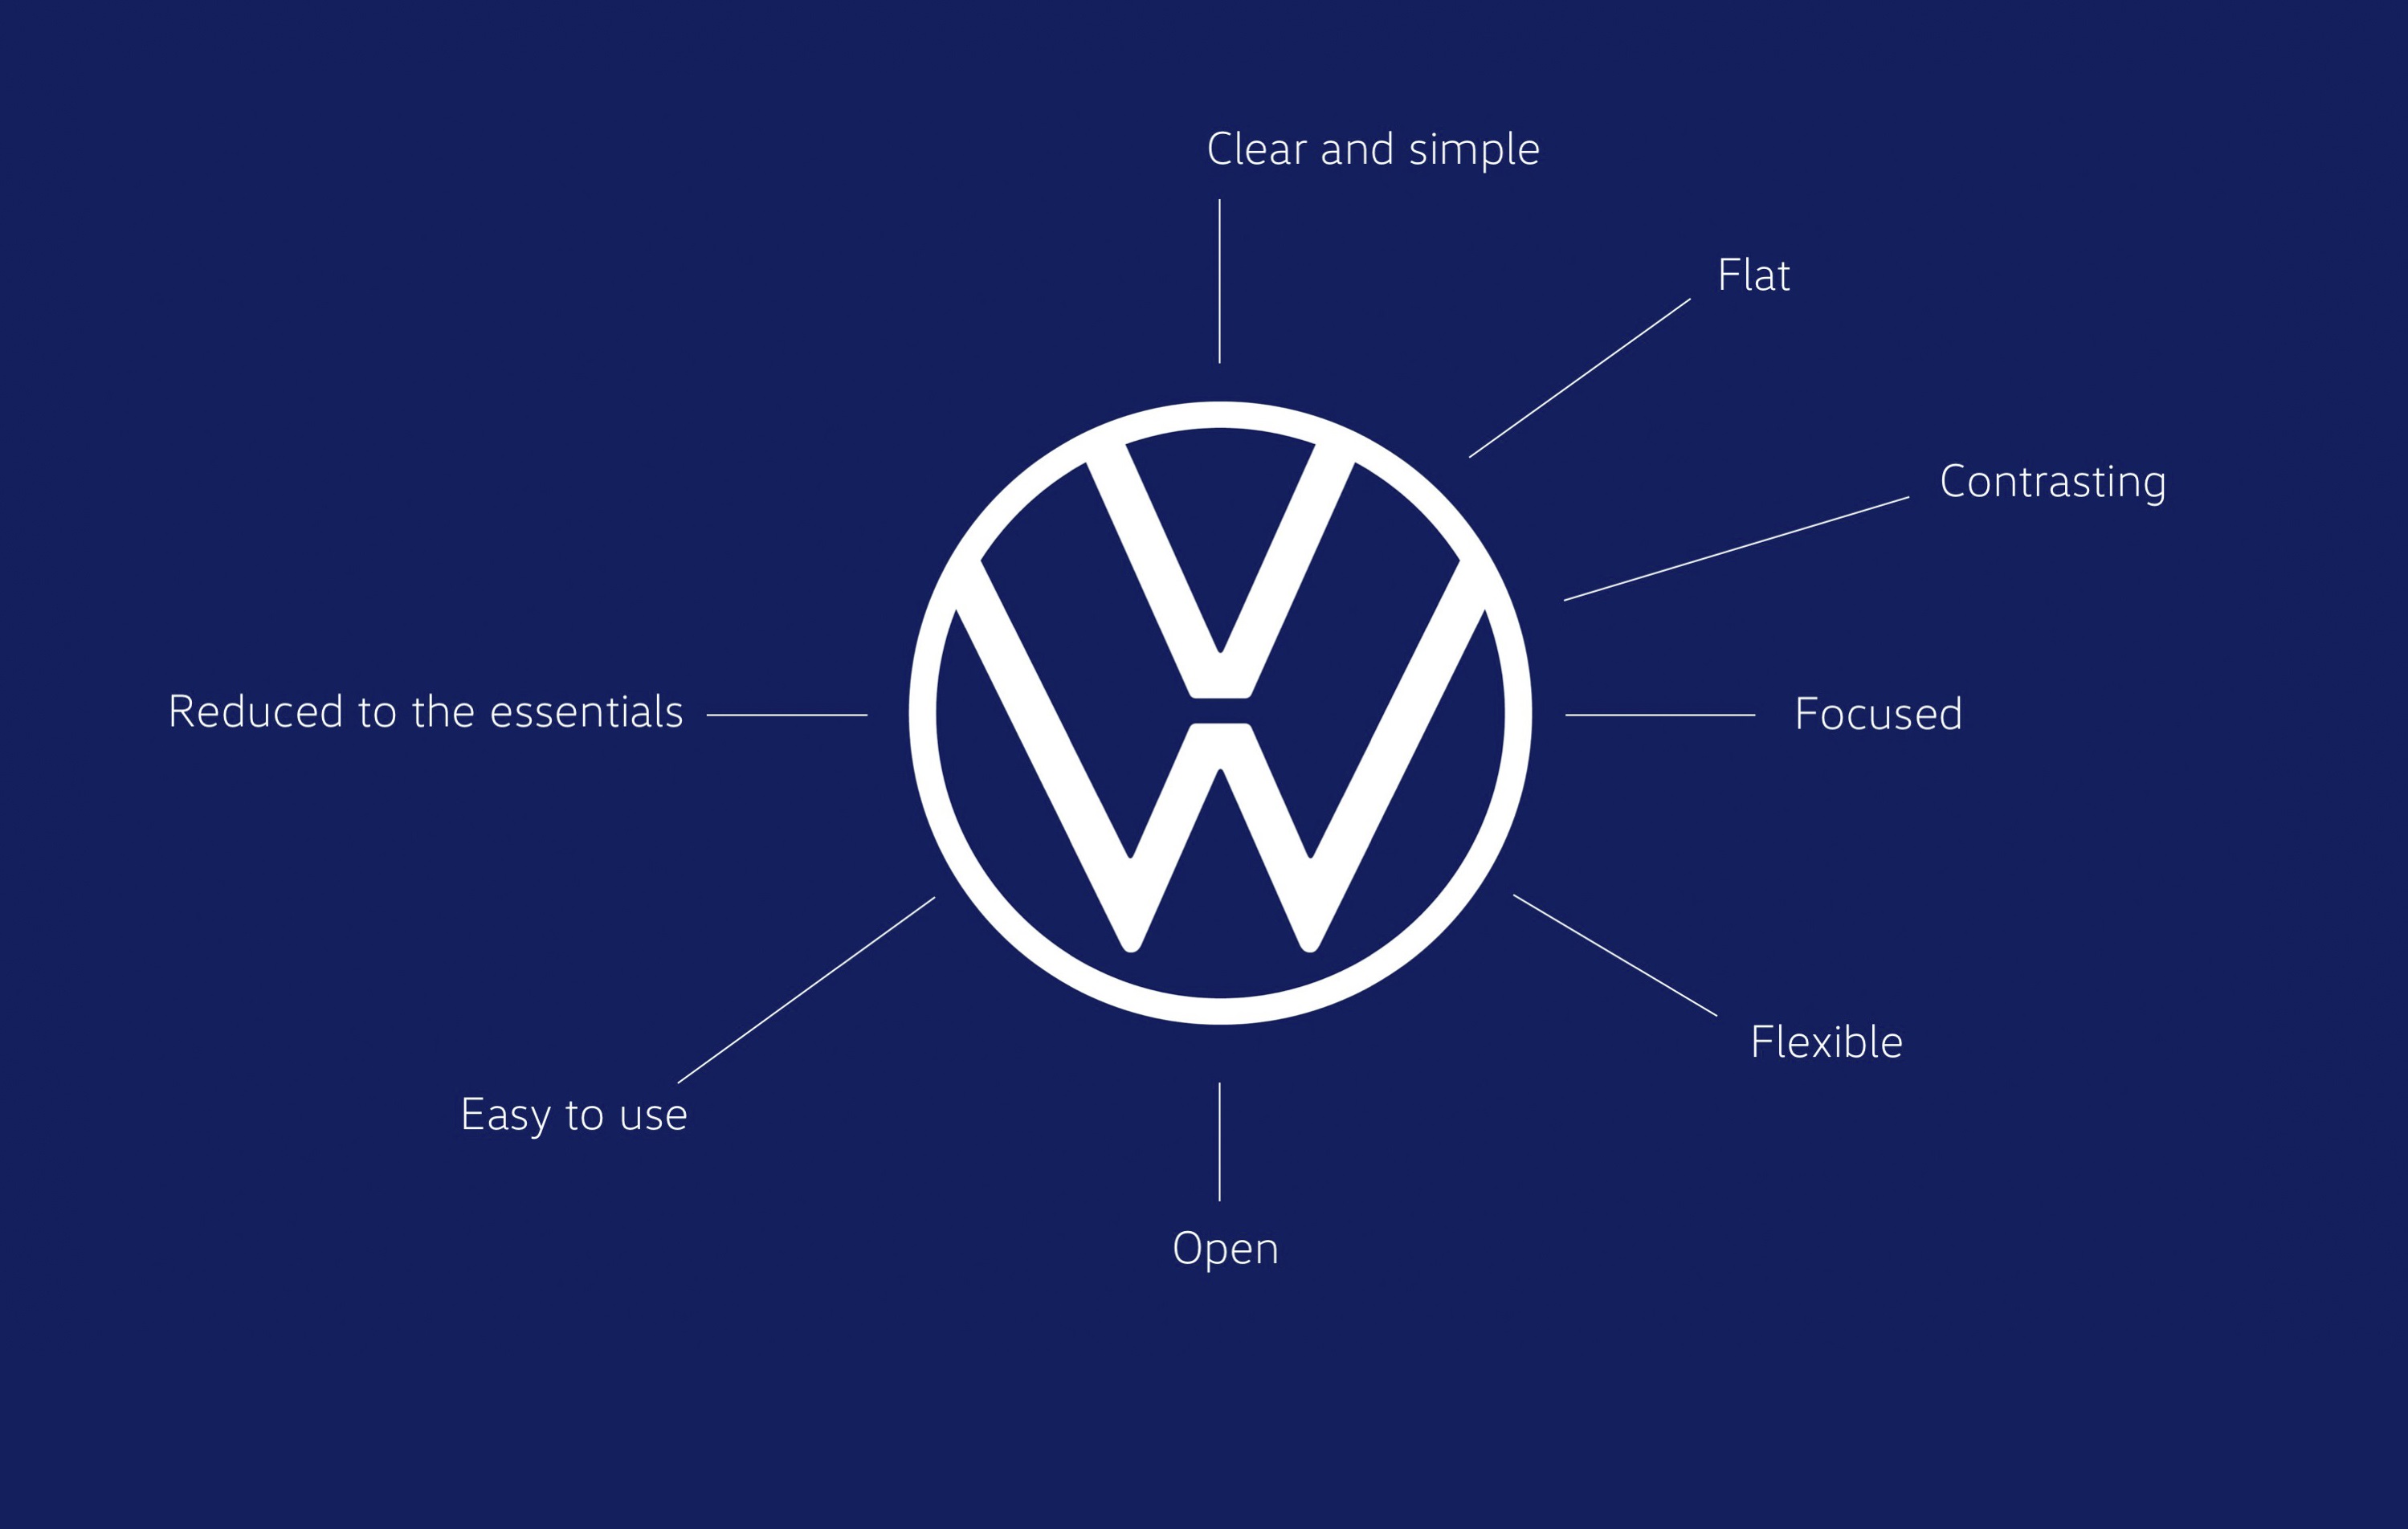 message-editor%2F1586447805287-a_new_look_for_the_iconic_volkswagen_logo-large-11361.jpg